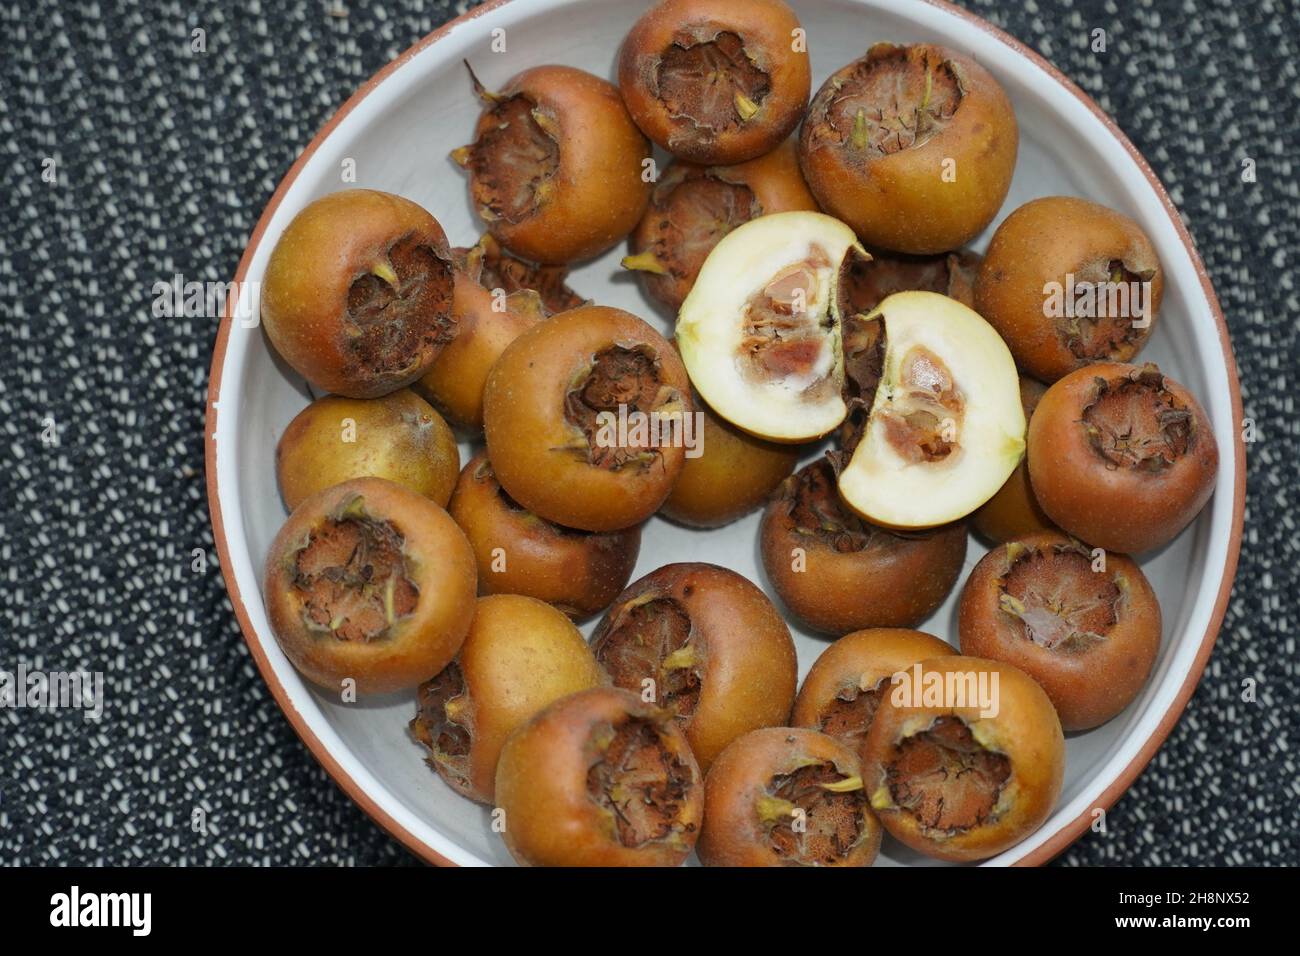 Healthy and edible medlar fruits (mespilus germanica, family rosaceae) on o medlar tree in december. Medlar fruit is available in winter. Stock Photo